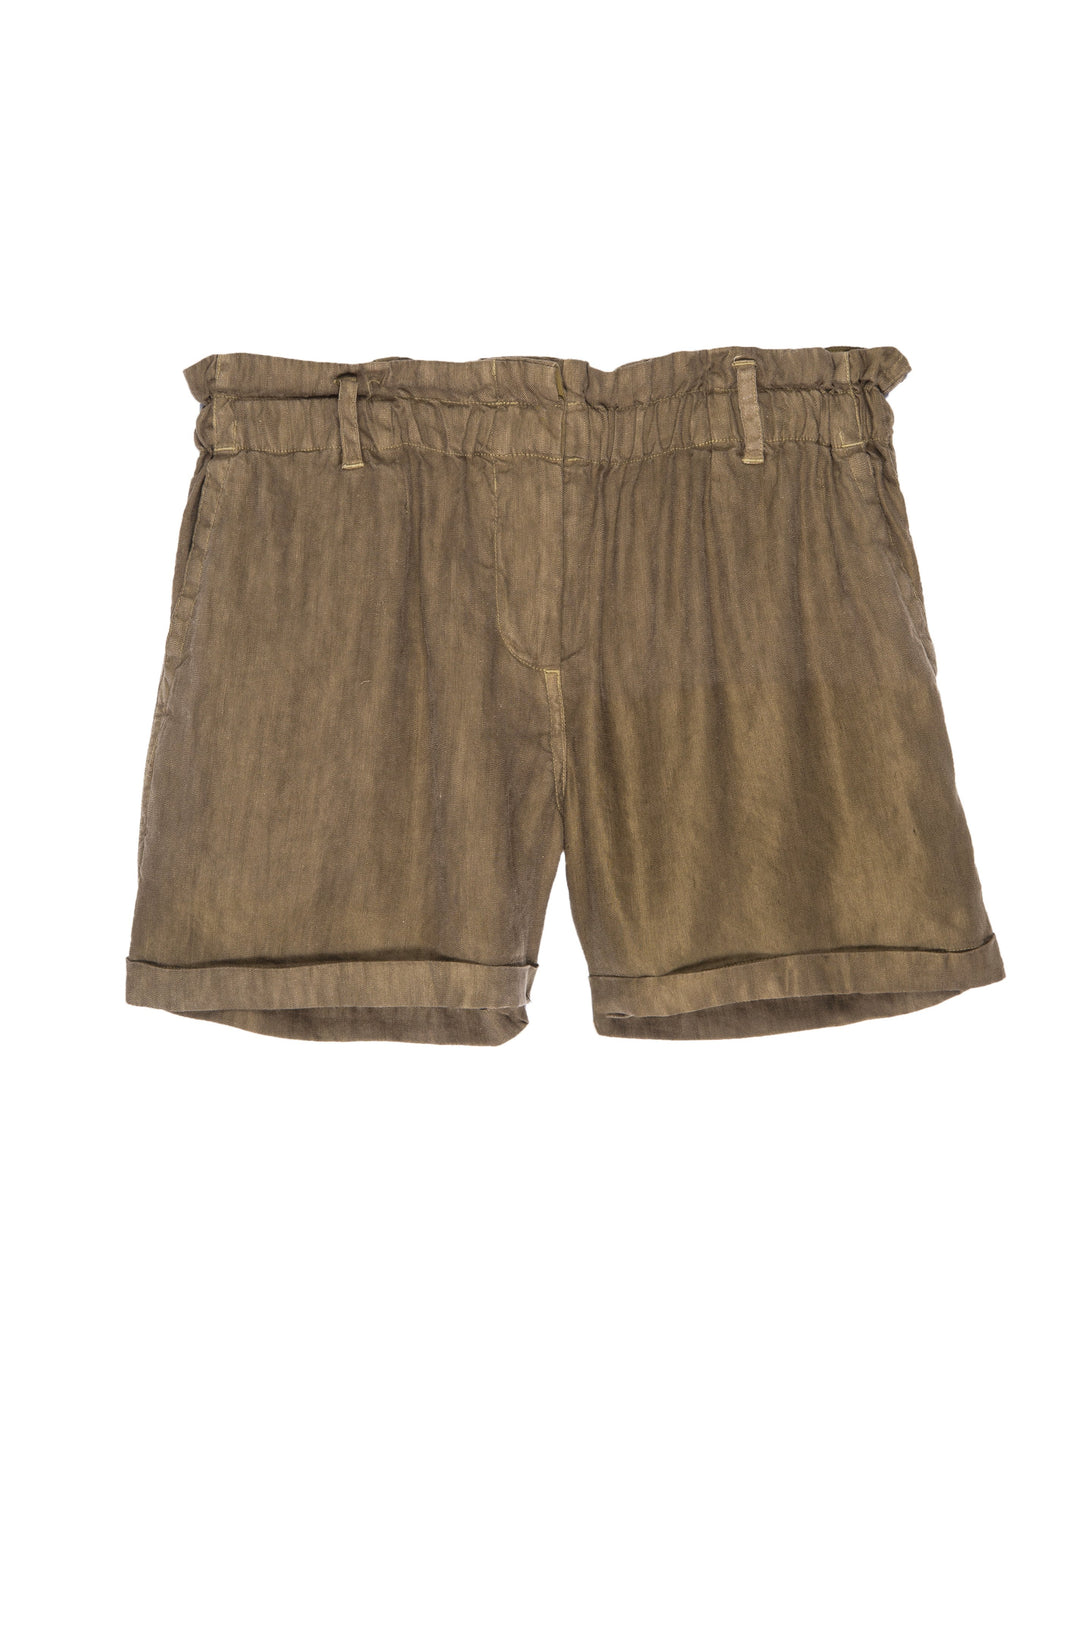 Monty Short - Canteen - Kingfisher Road - Online Boutique